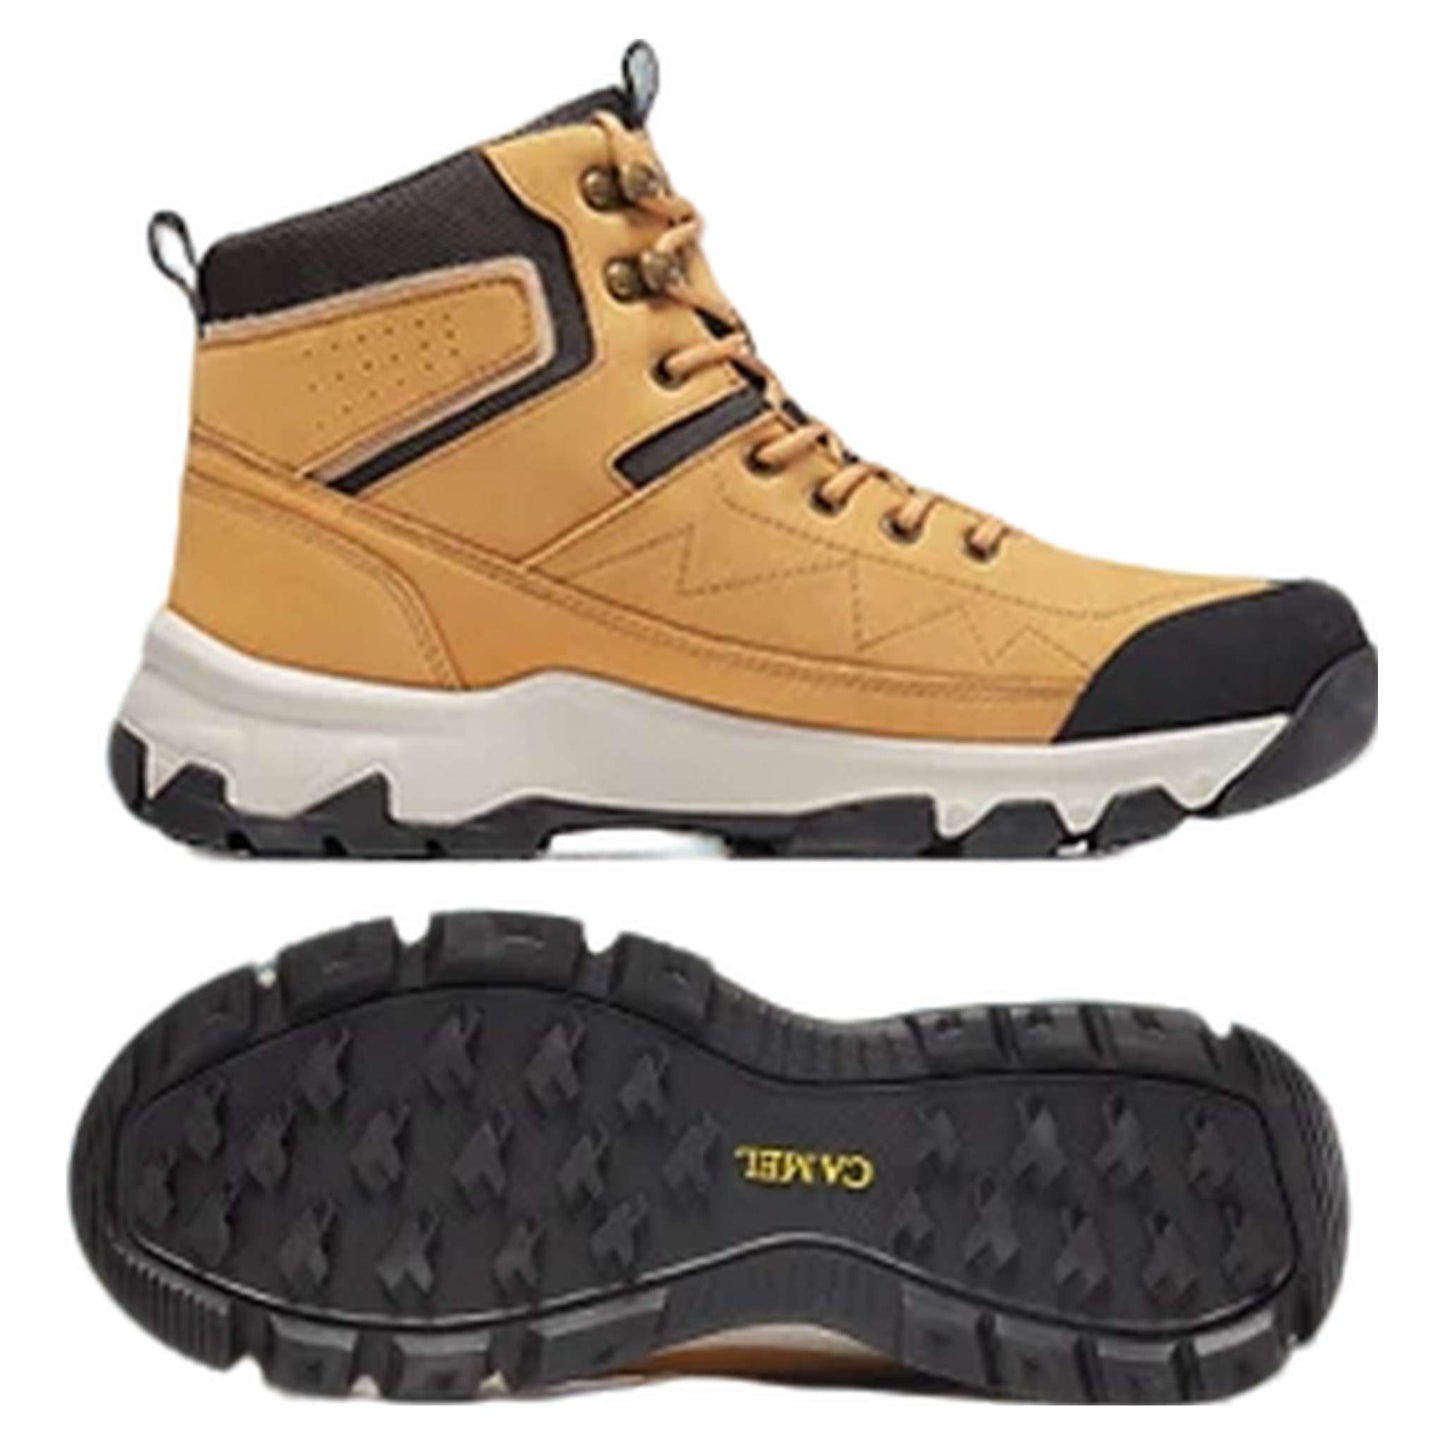 Men's High-Top Ankle Hiking Boots - Durable, Non-slip Outdoor Trekking Shoes